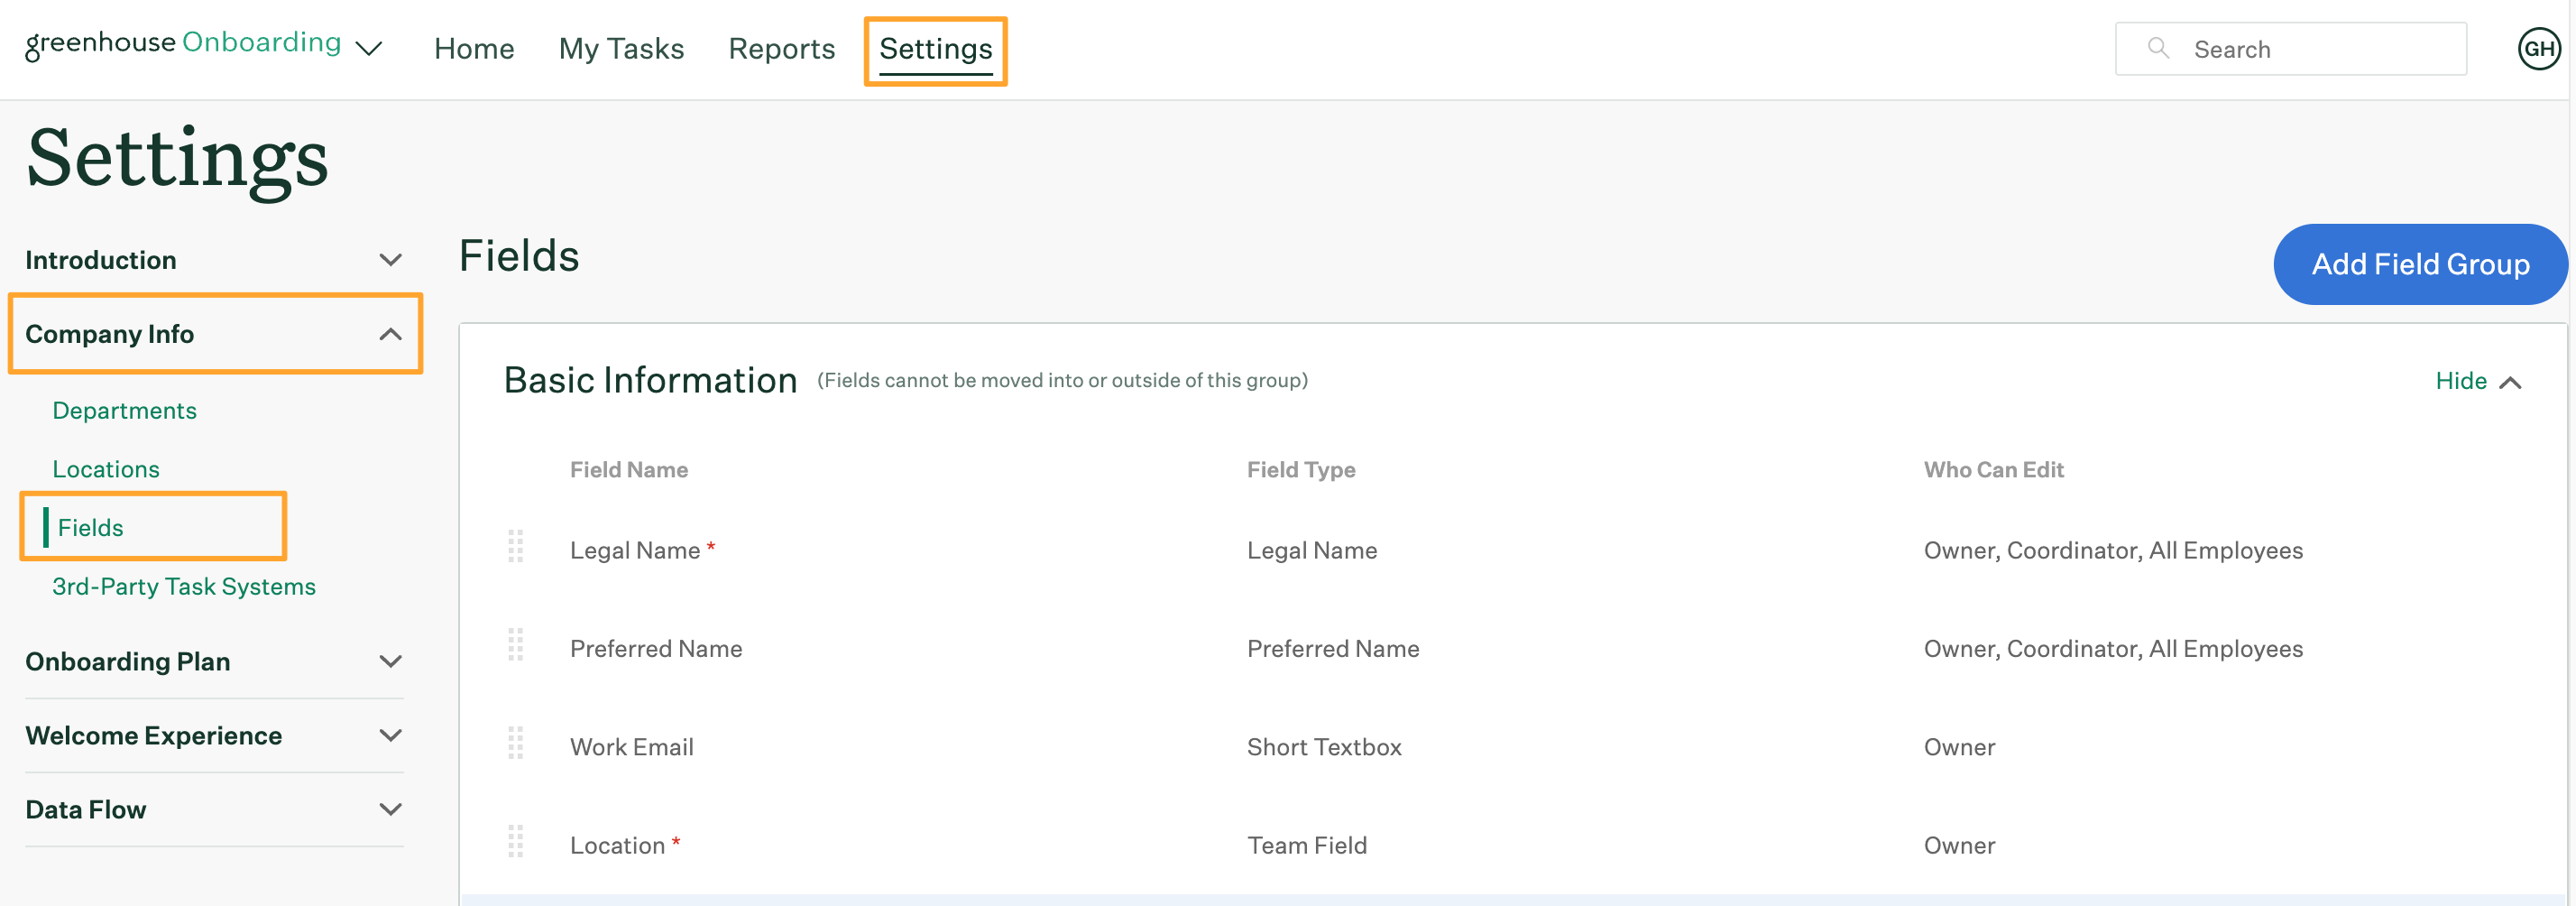 Fields page in Greenhouse Onboarding Settings with navigation steps highlighted